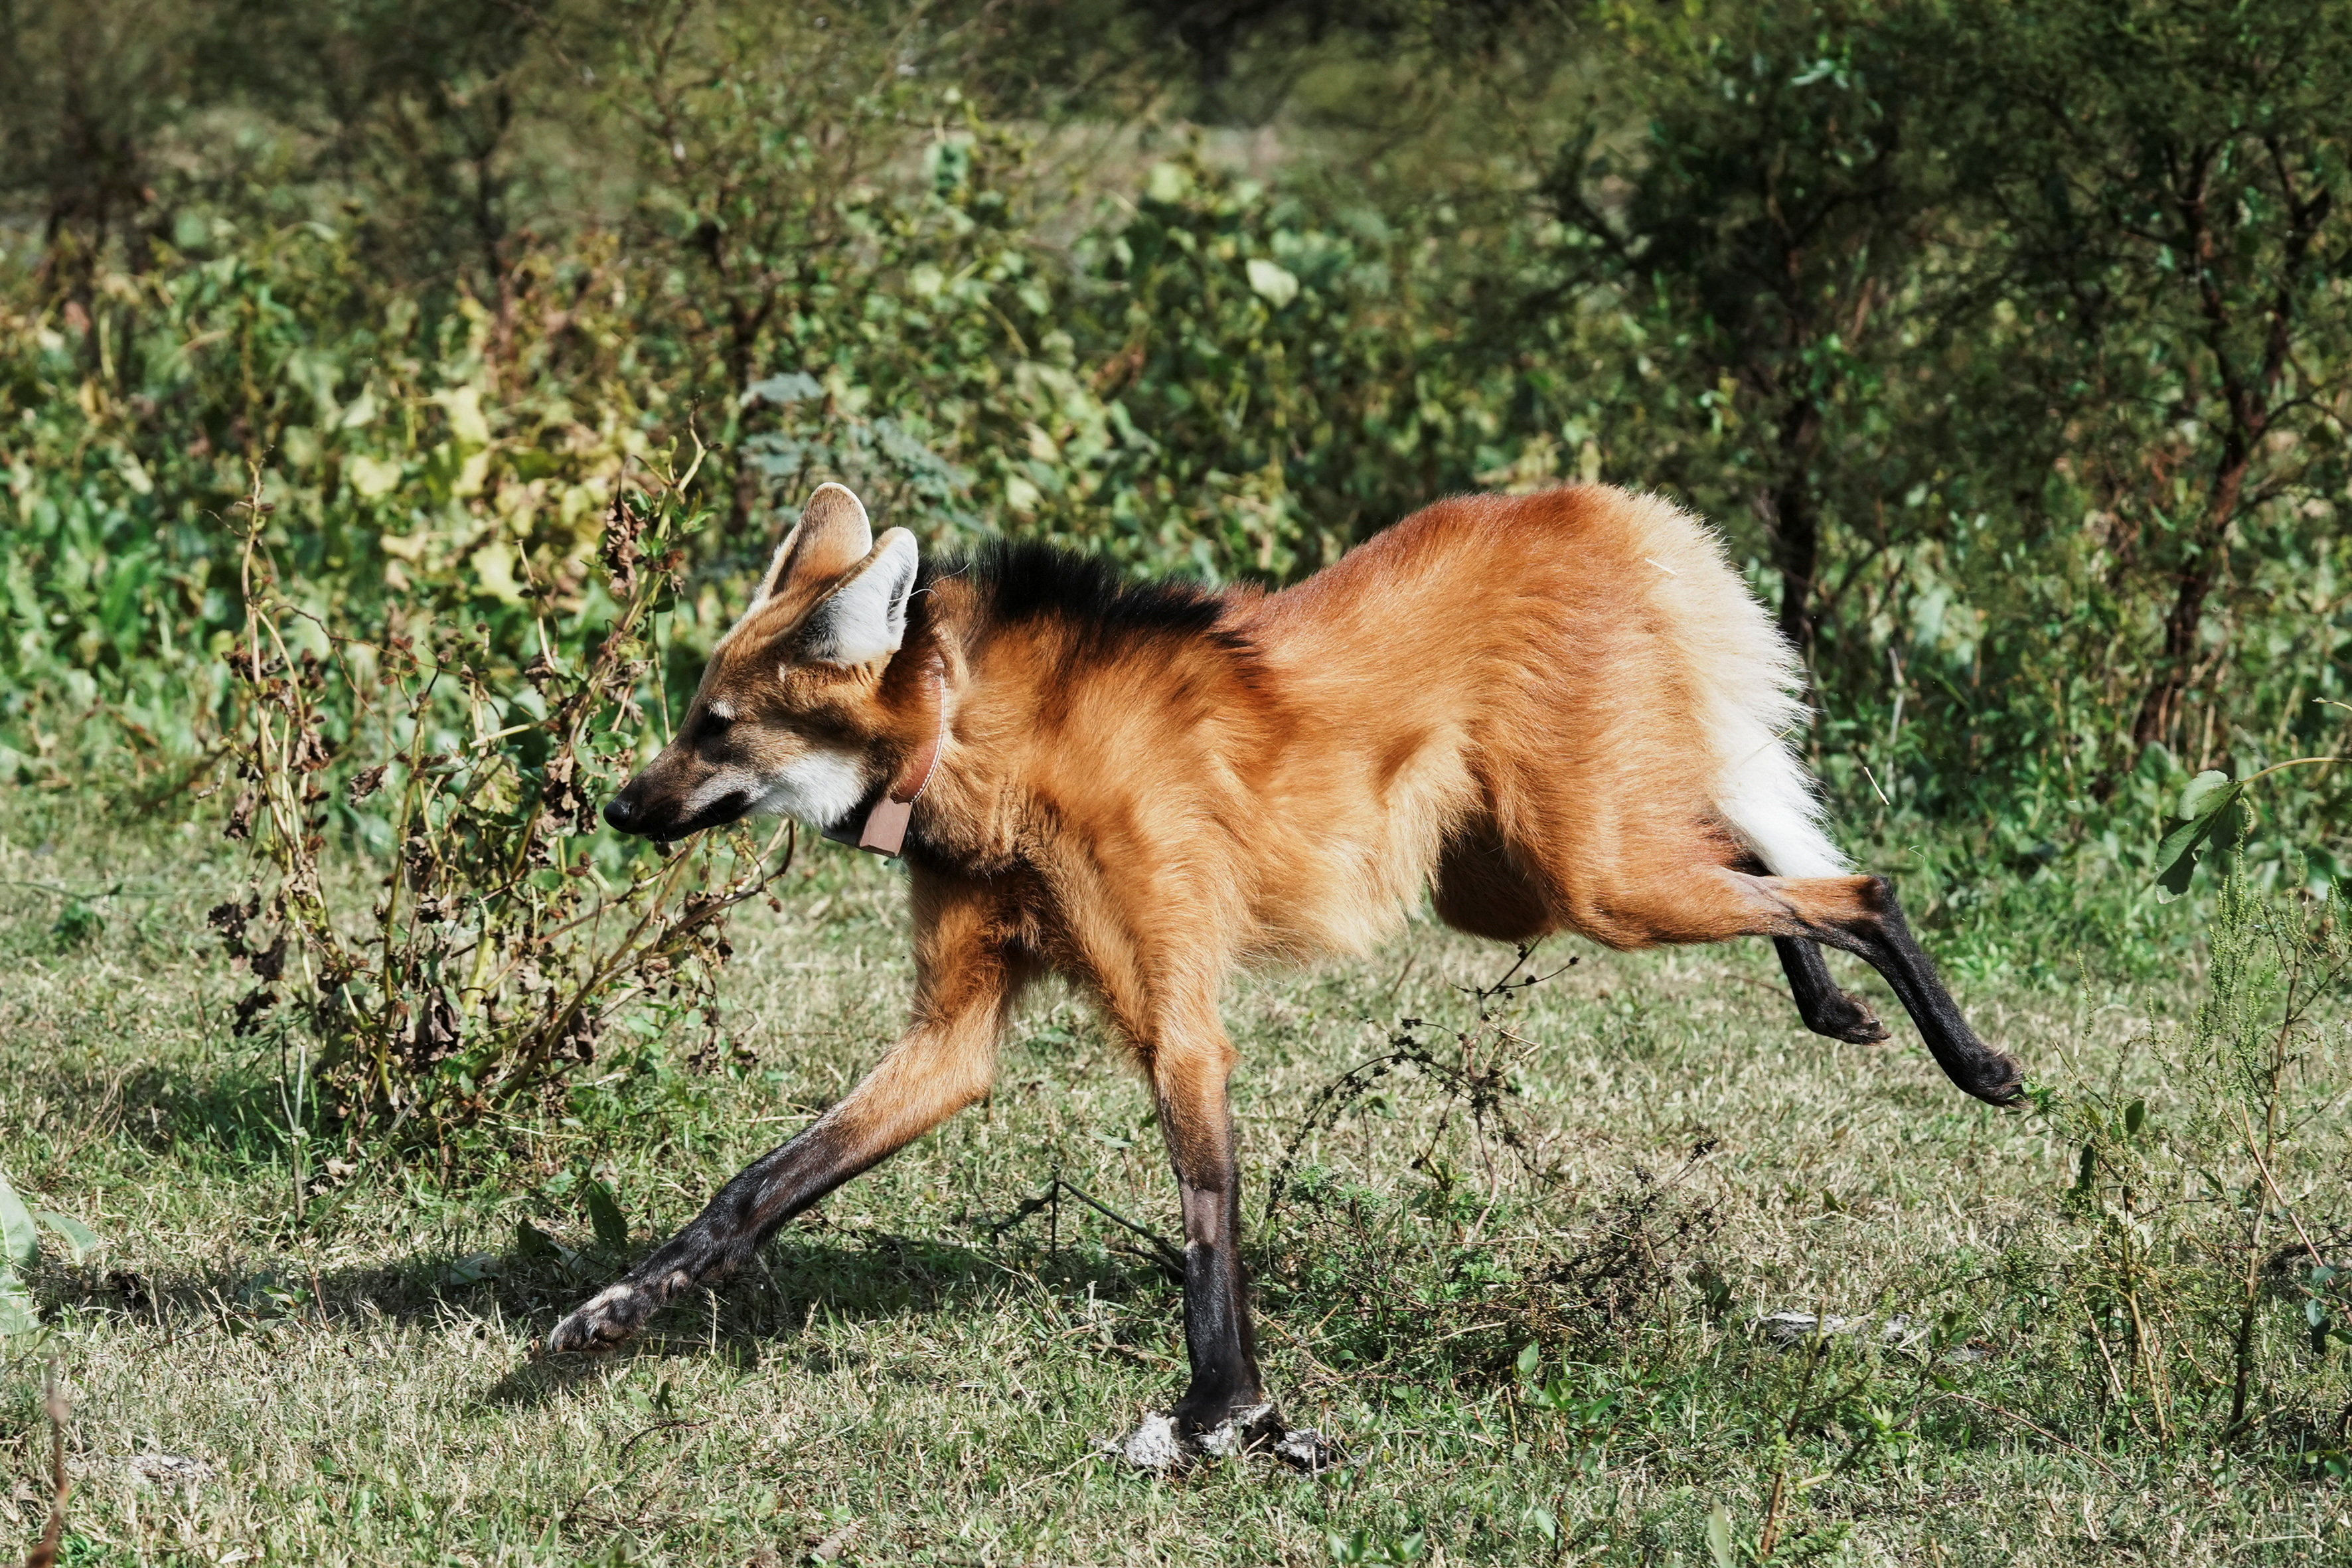 Argentine long-legged, red-hued maned wolf returned to the wild